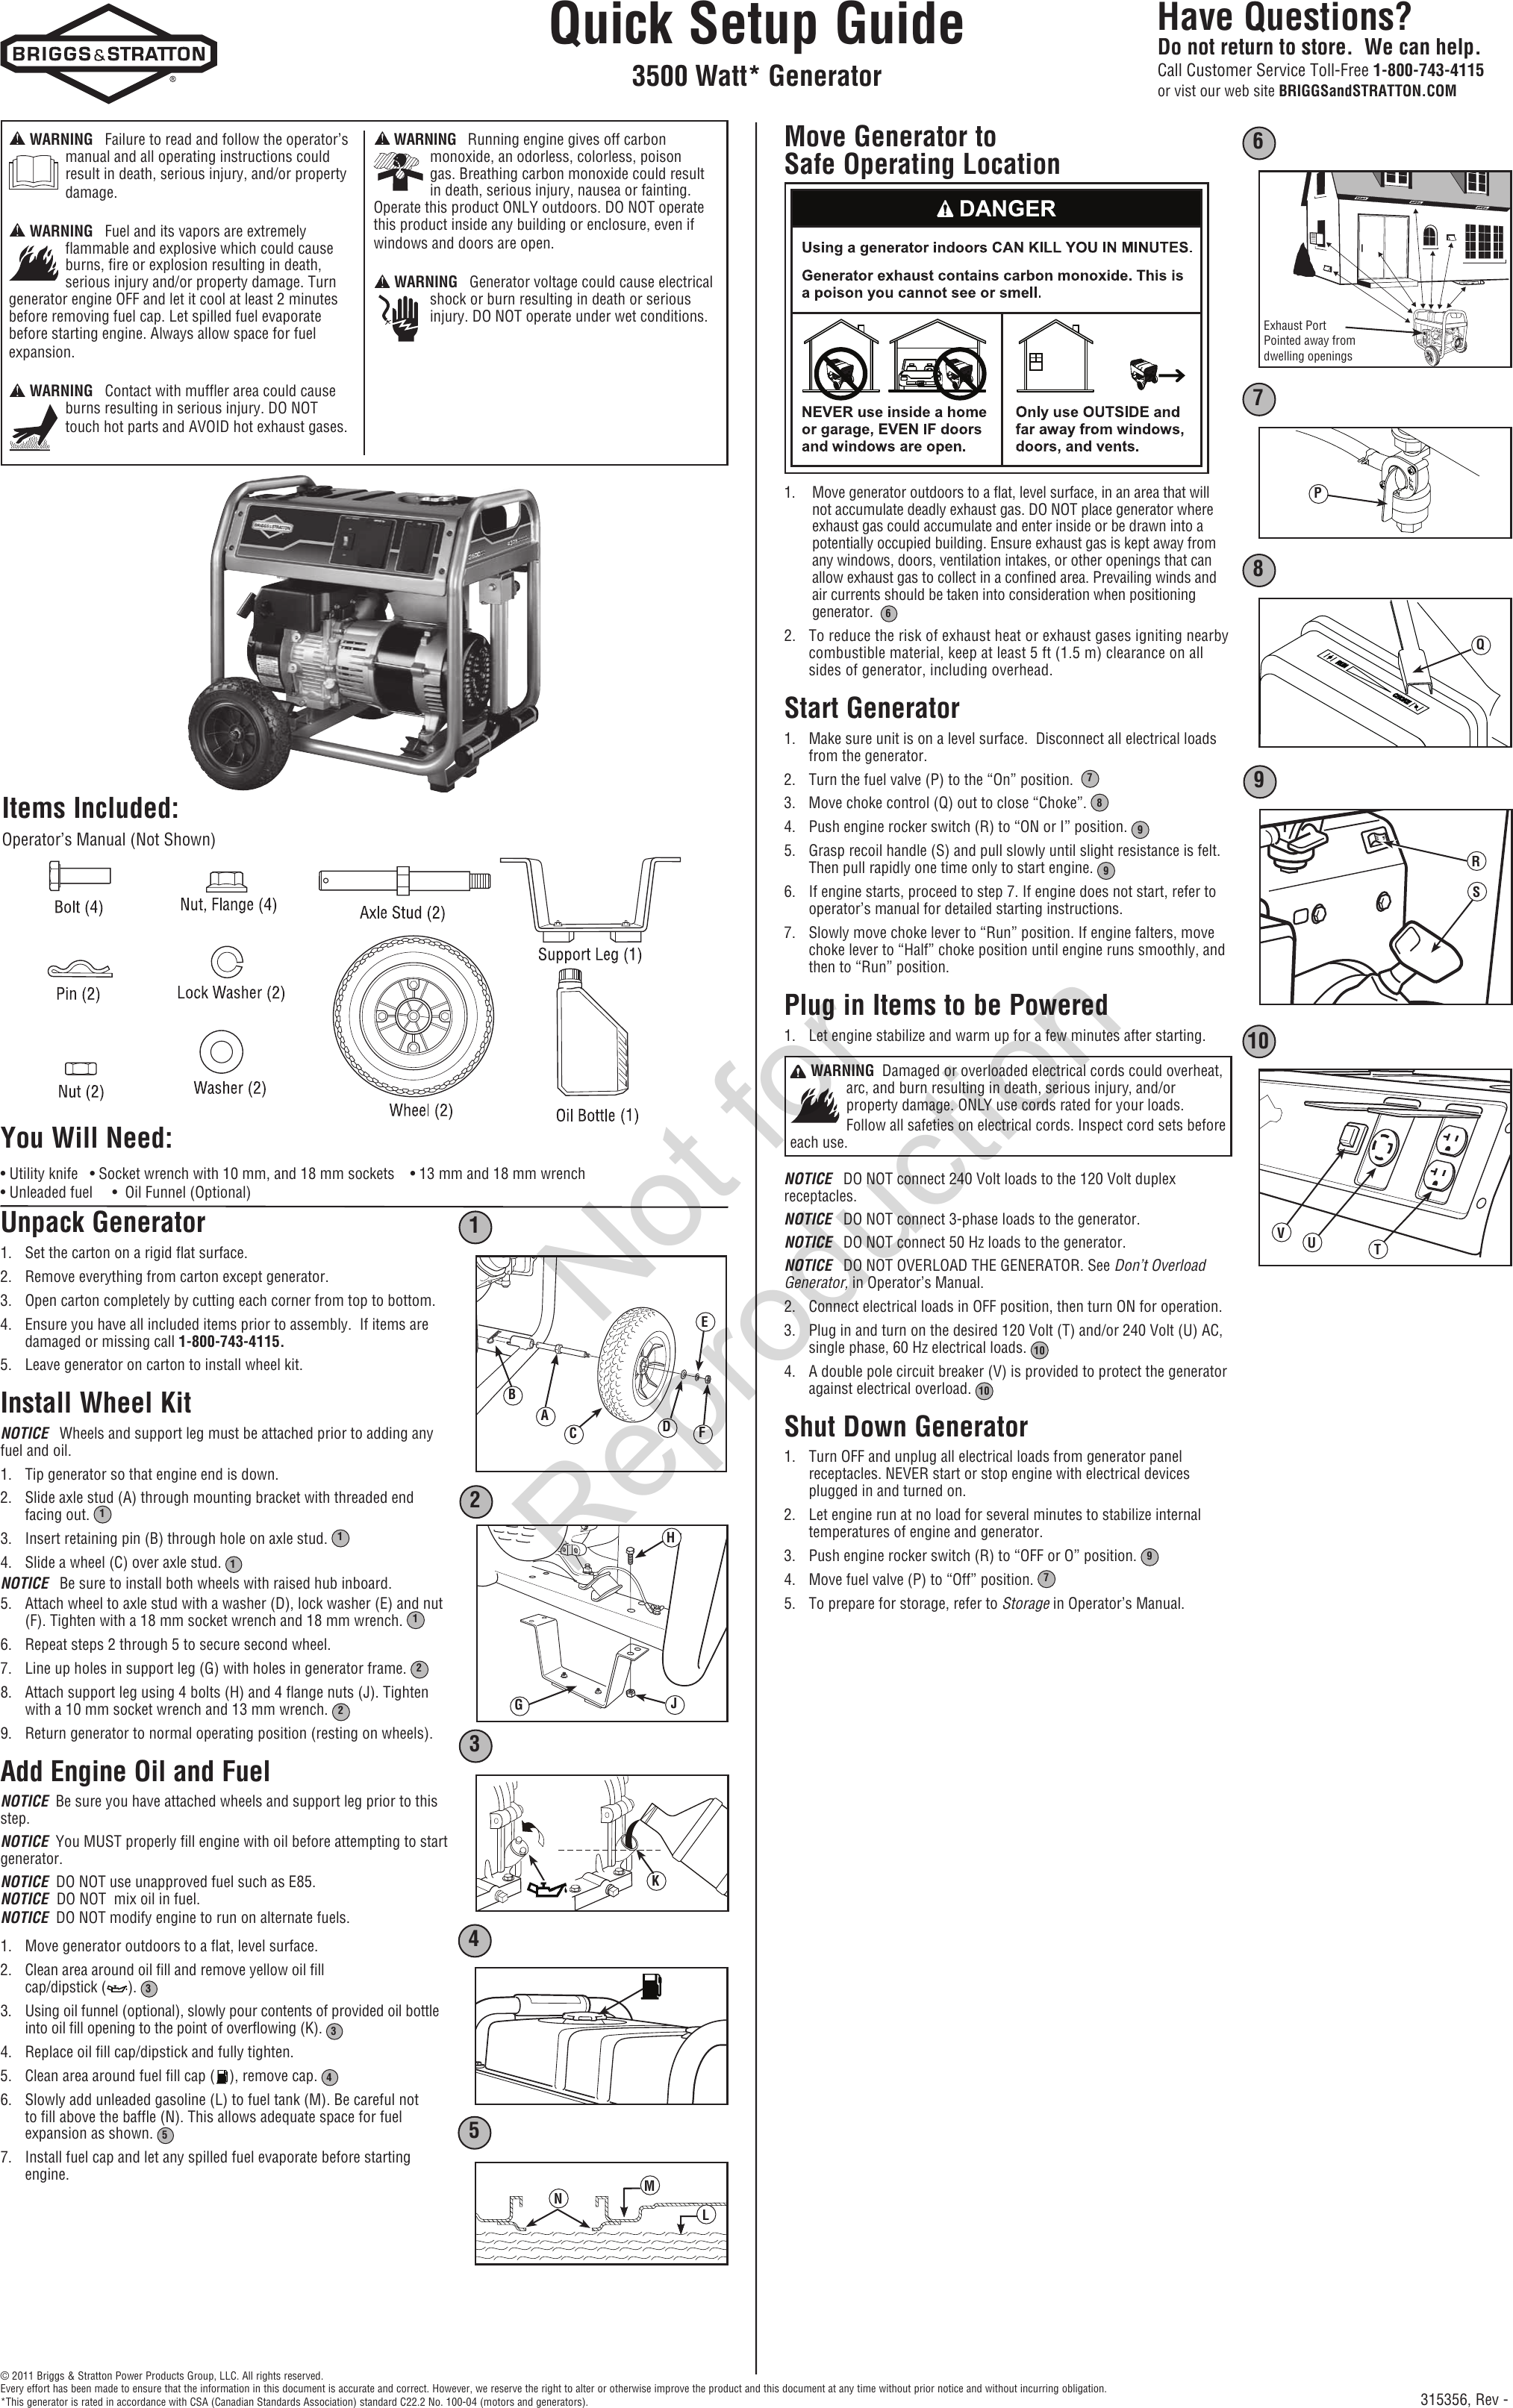 Page 1 of 2 - 85269 2 Briggs & Stratton 30466 Set Up Guide